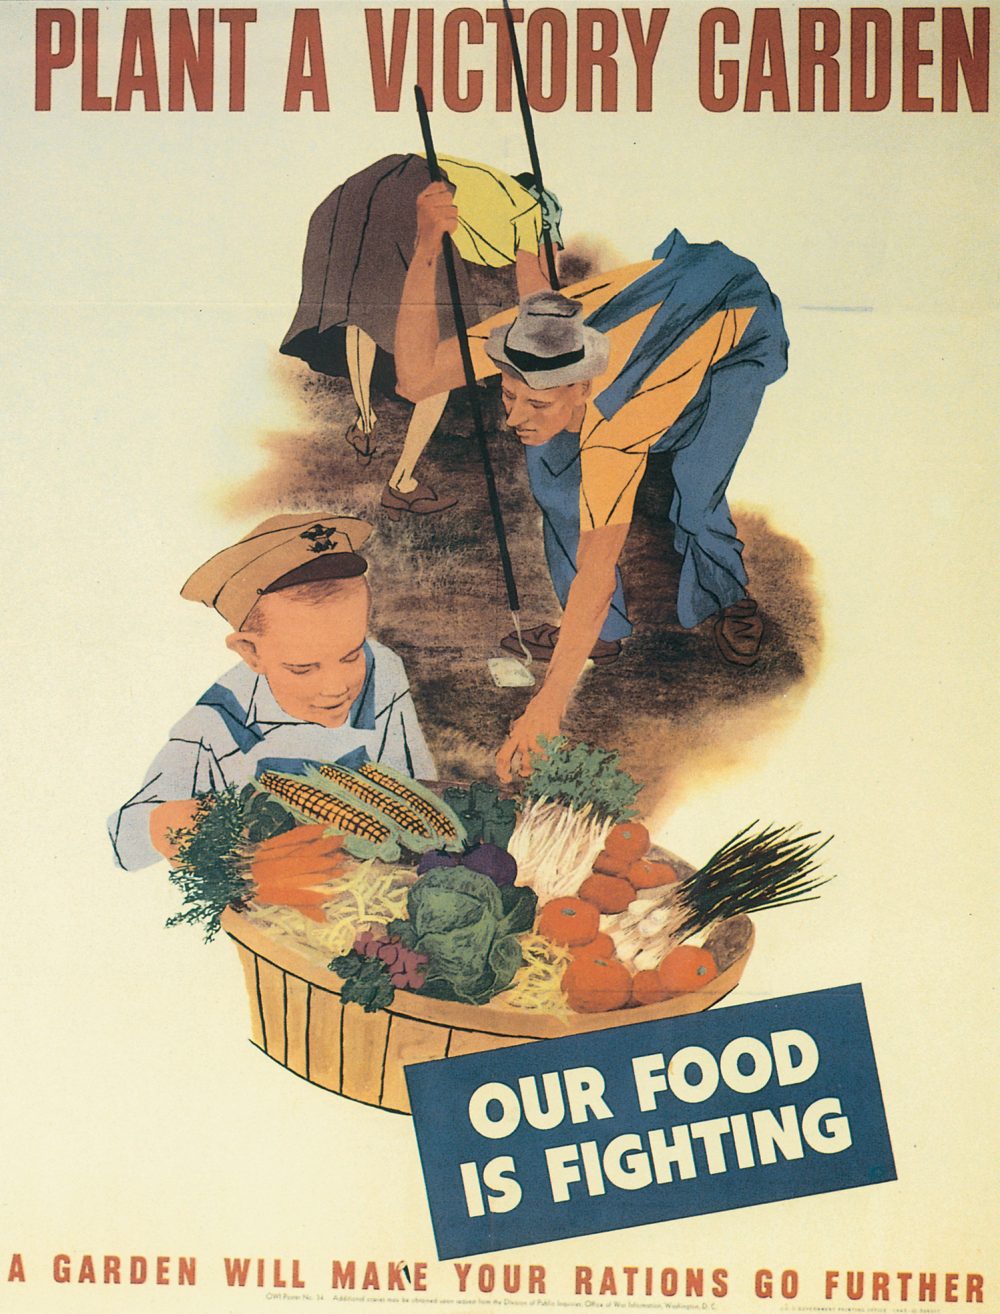 US poster promoting Victory Gardens, 1943